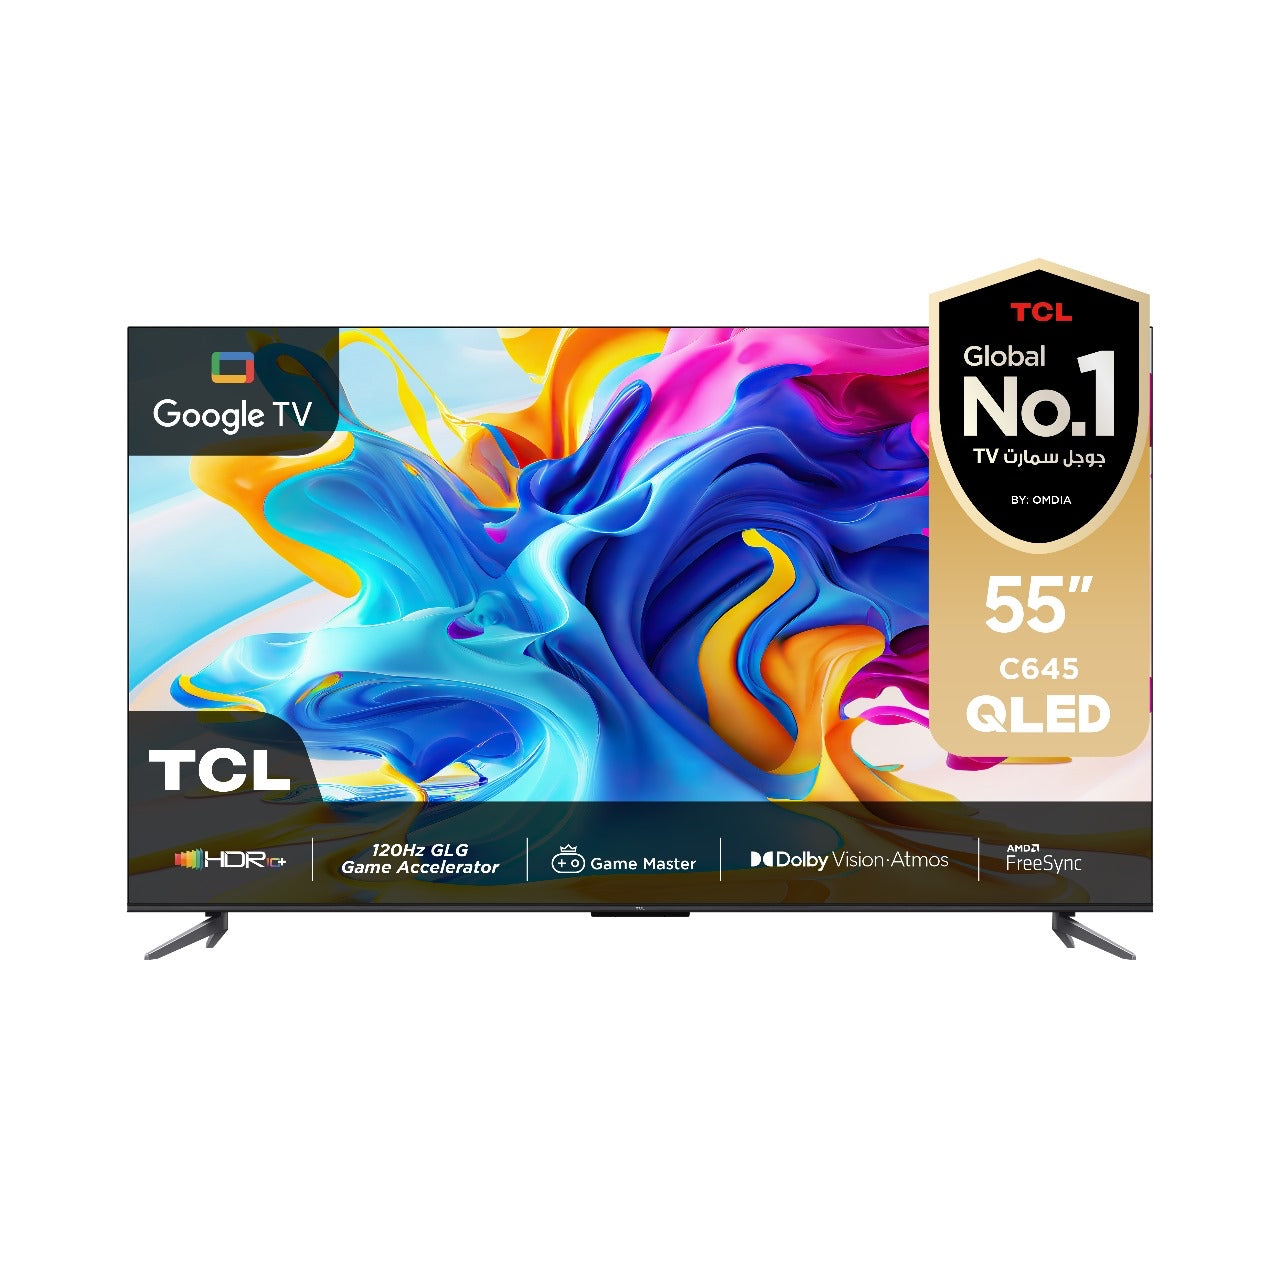 TCL C645 Color Master Review: BEST 4K QLED TV THIS 2023? 